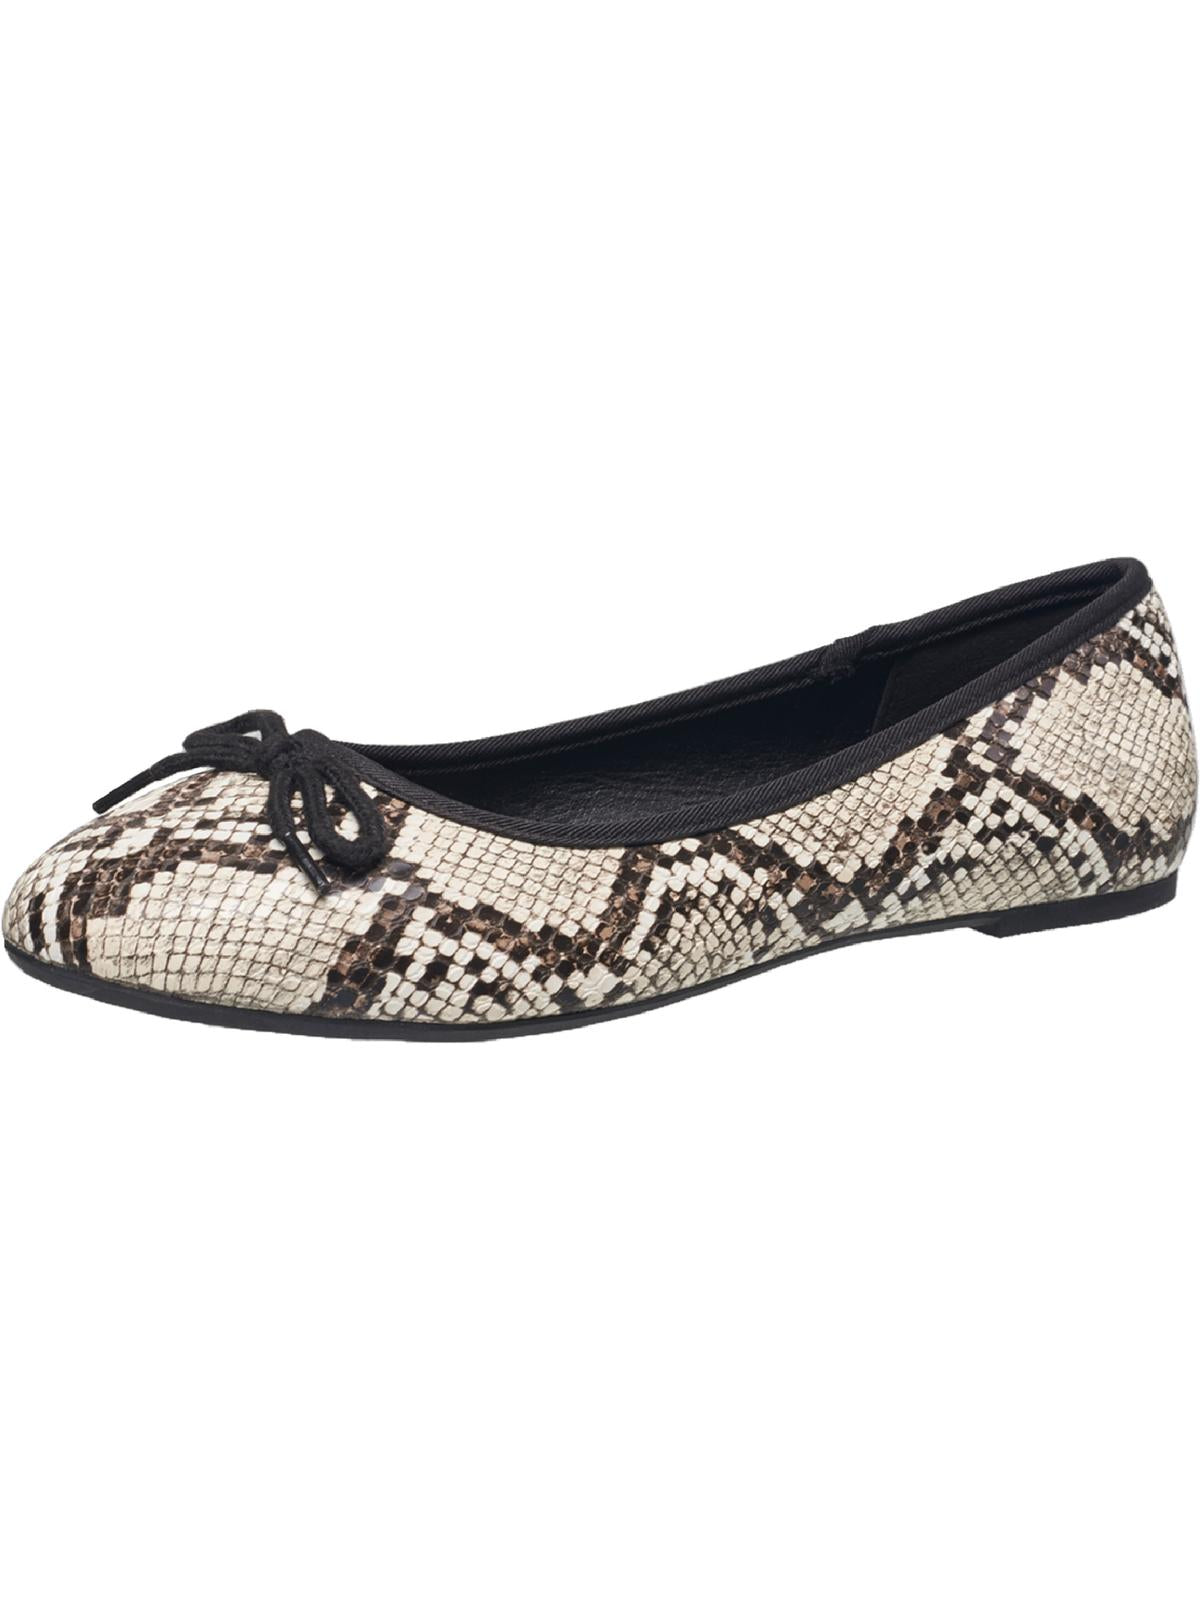 French Connection Diana Womens Faux Leather Snake Print Ballet Flats US 9 female